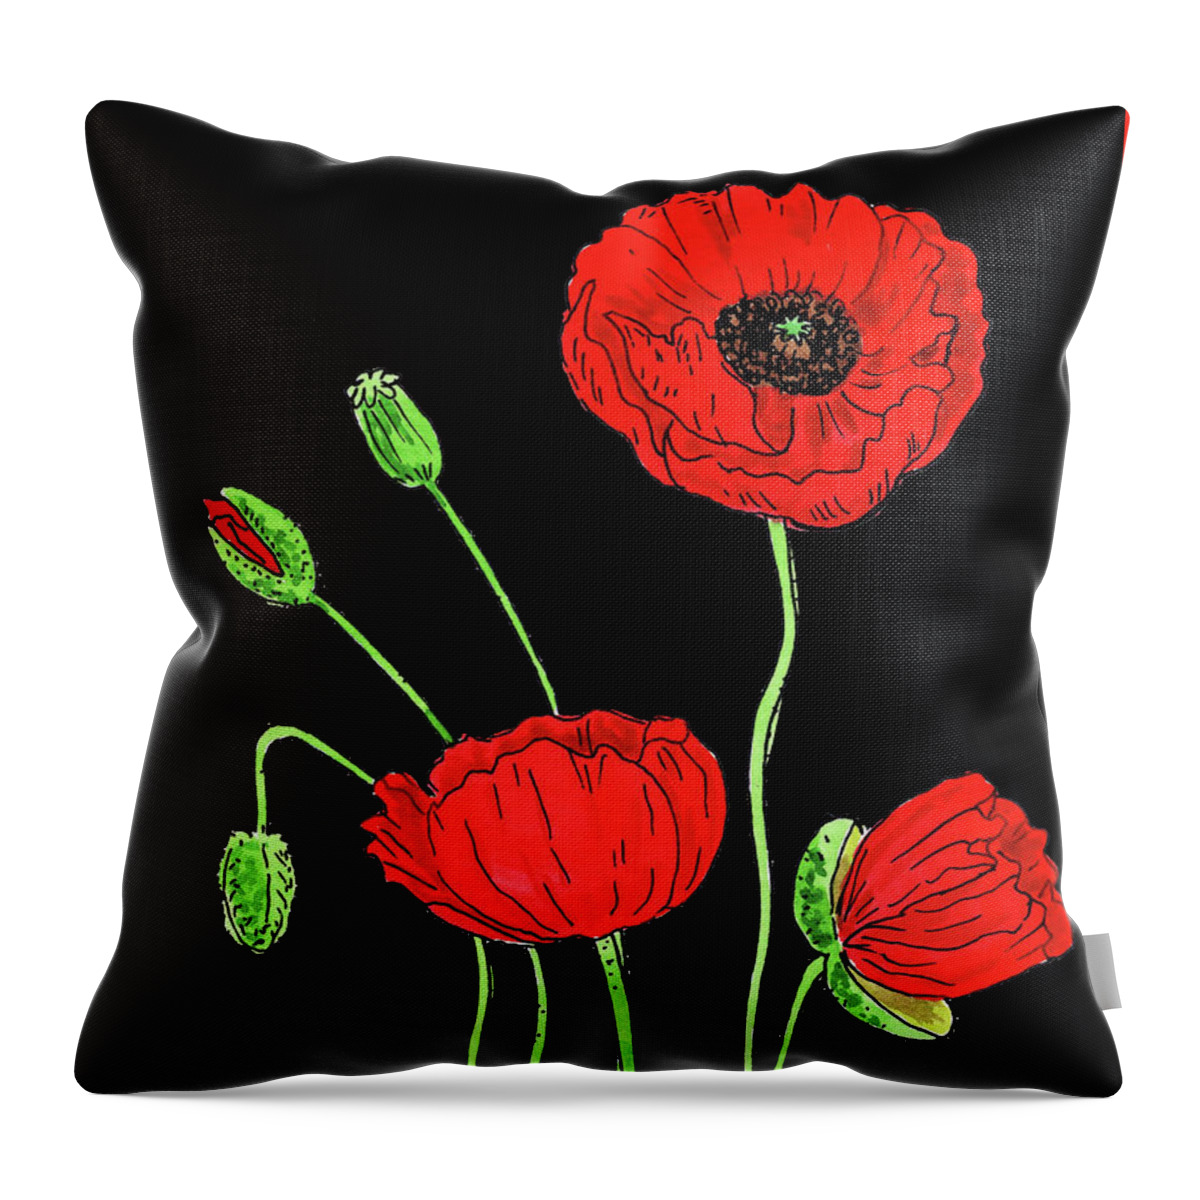 Red Throw Pillow featuring the painting Red Poppy Flowers Watercolour by Irina Sztukowski